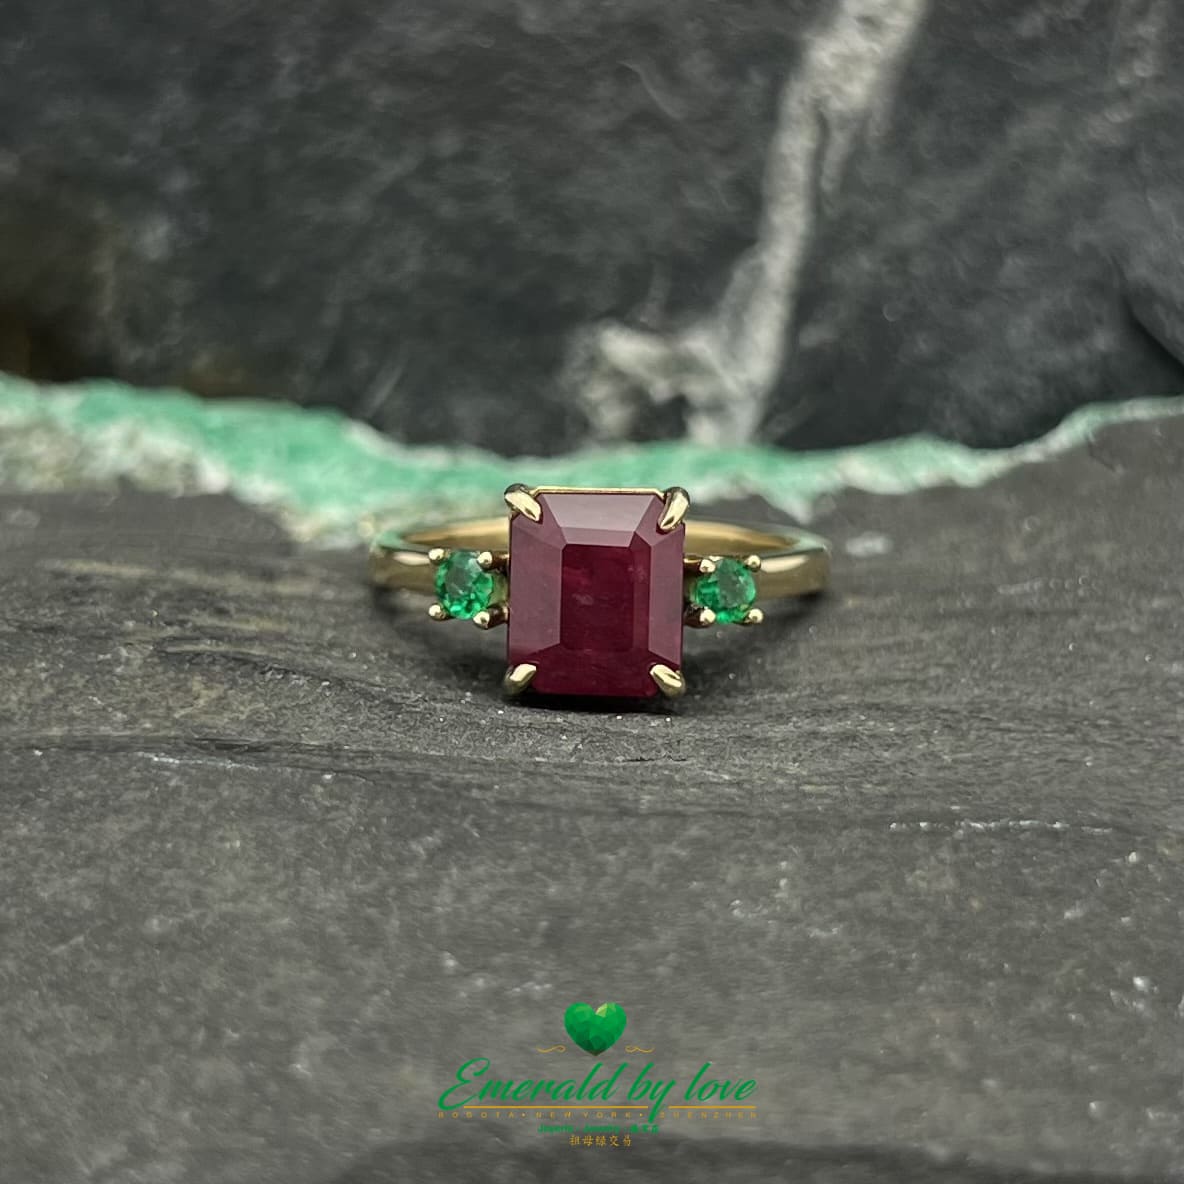 Royal Radiance: Yellow Gold Ring with Central Ruby and Flanking Round Emeralds